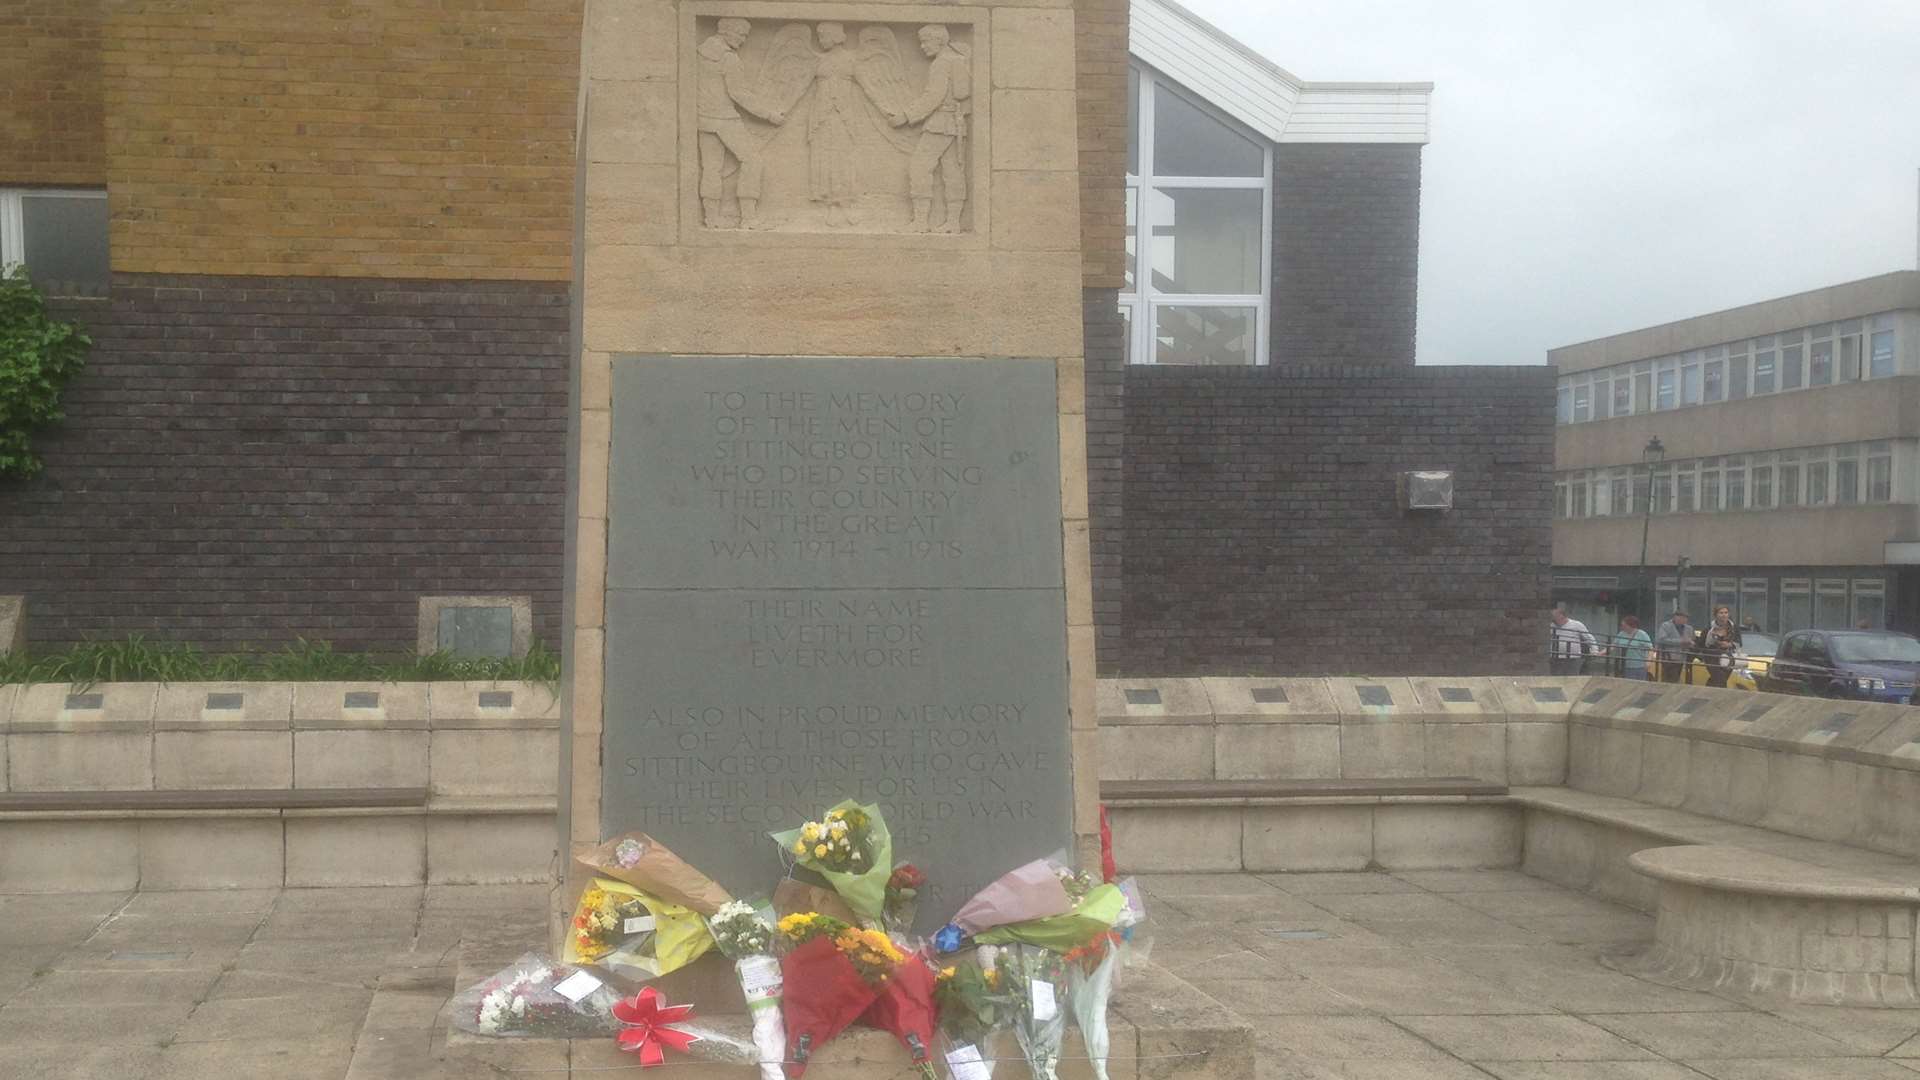 Wreaths will be laid at the town's cenotaph